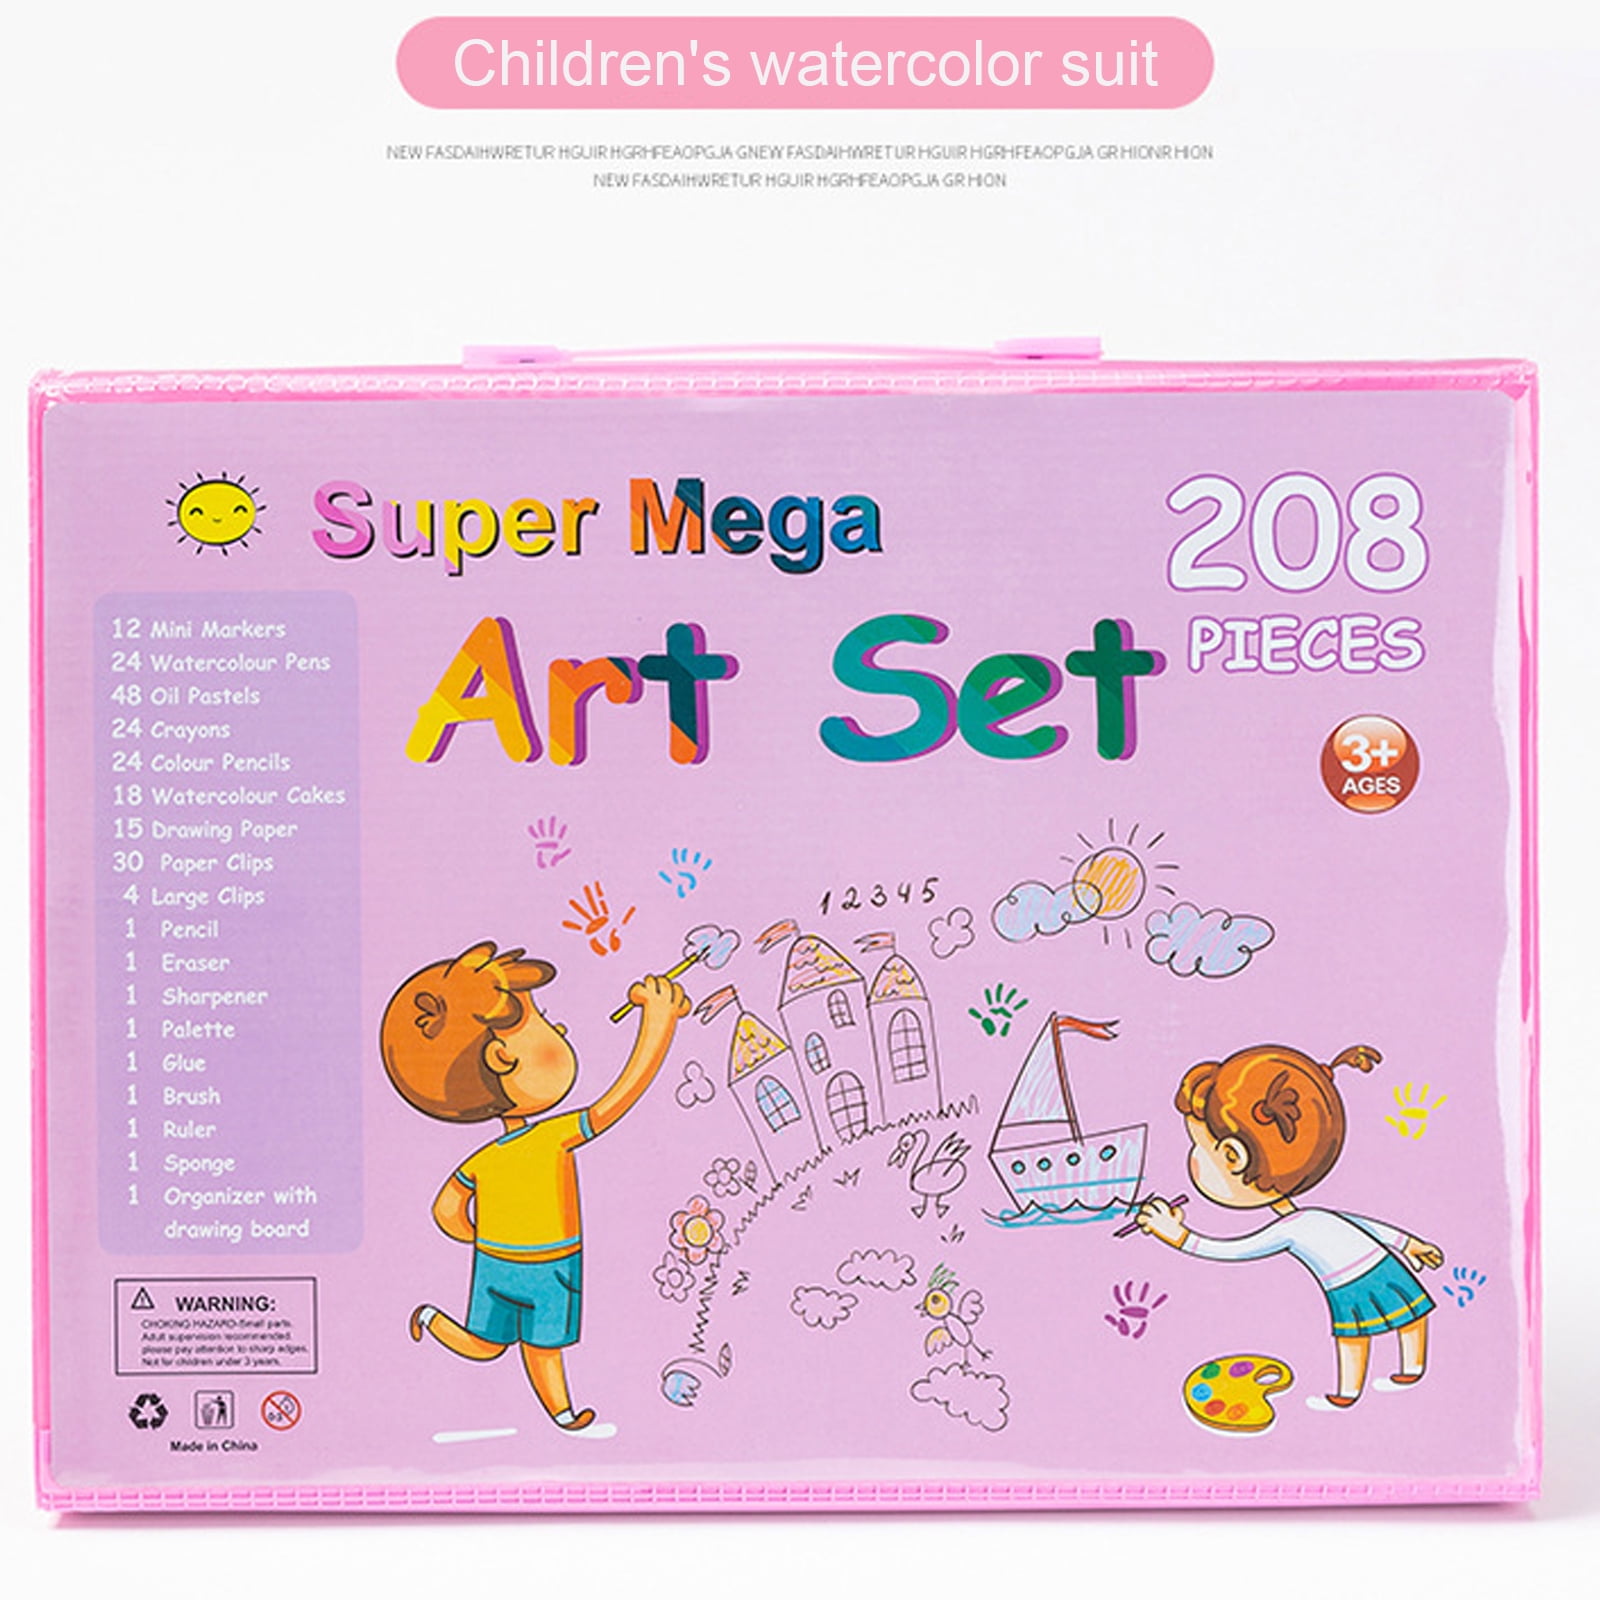  homicozy Art Supplies for Kids Ages 4-12,Mermaid Drawing Sets  Art Case,Coloring Kits with Double Sided Trifold Easel,Crayon,Colored  Pencil,Marker,Coloring Book,Drawing Stuffs Gifts for Girls Age 4-6-8